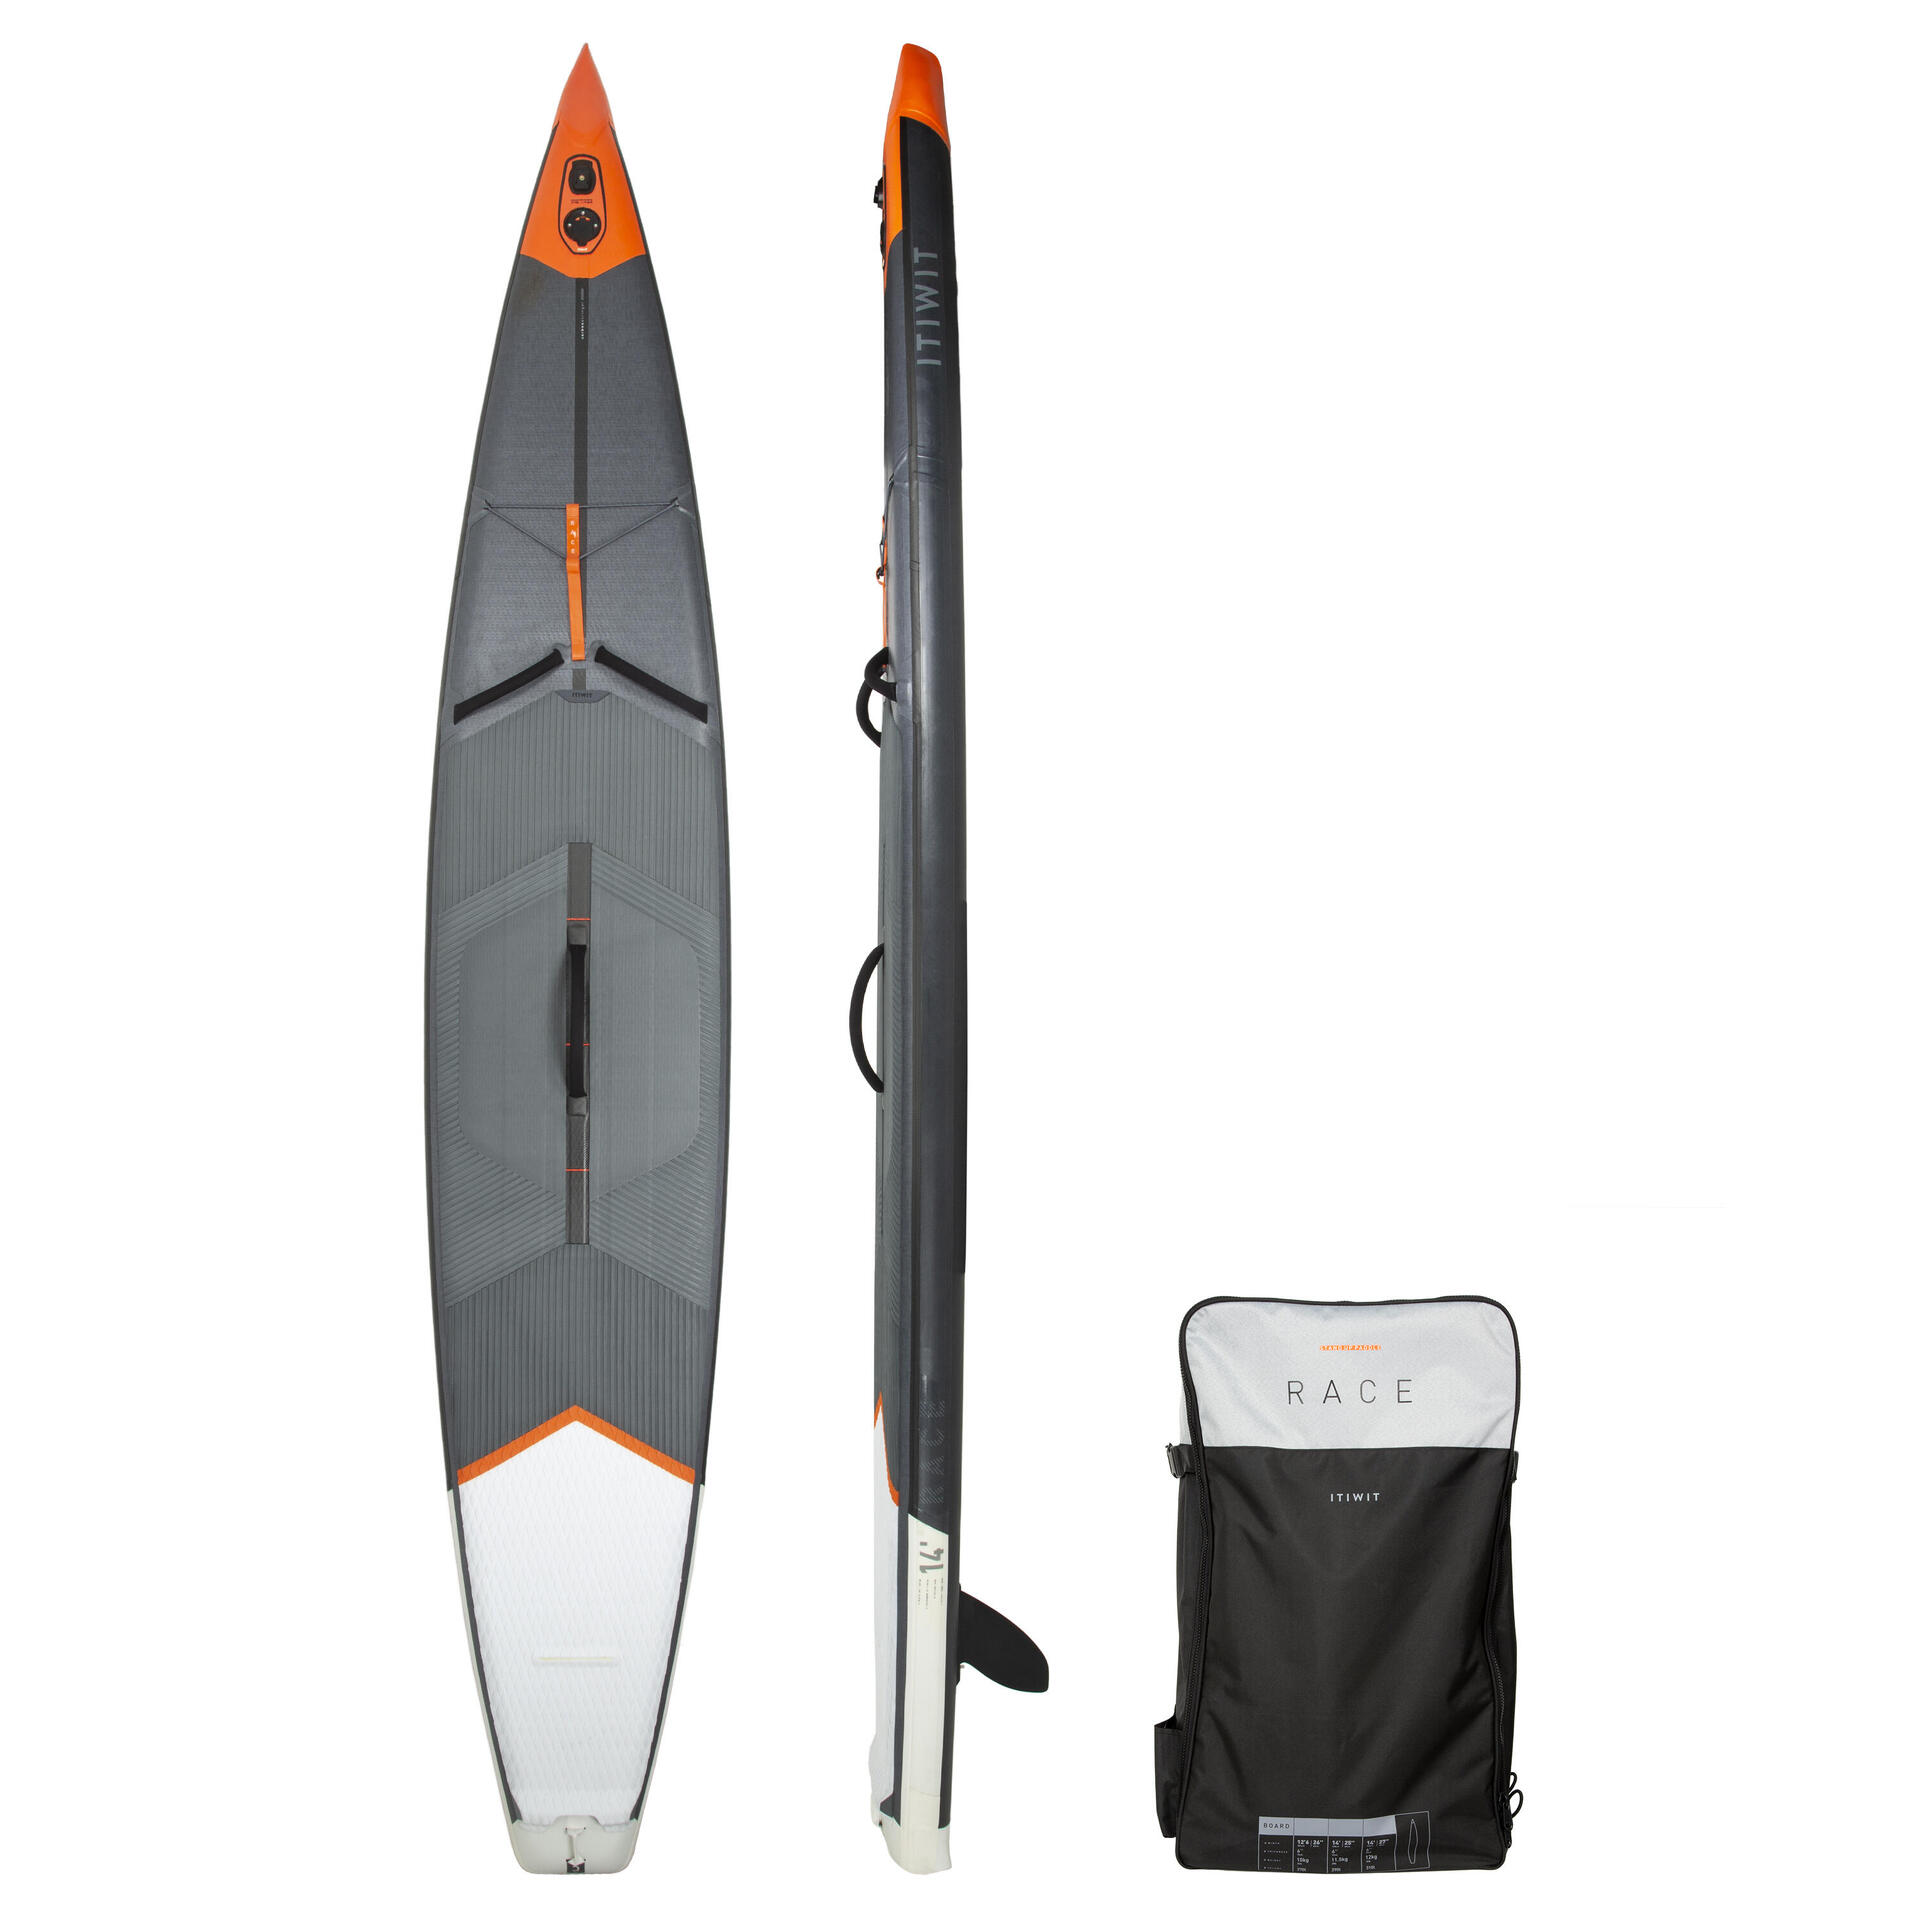 Comment choisir un stand up paddle (SUP) ?